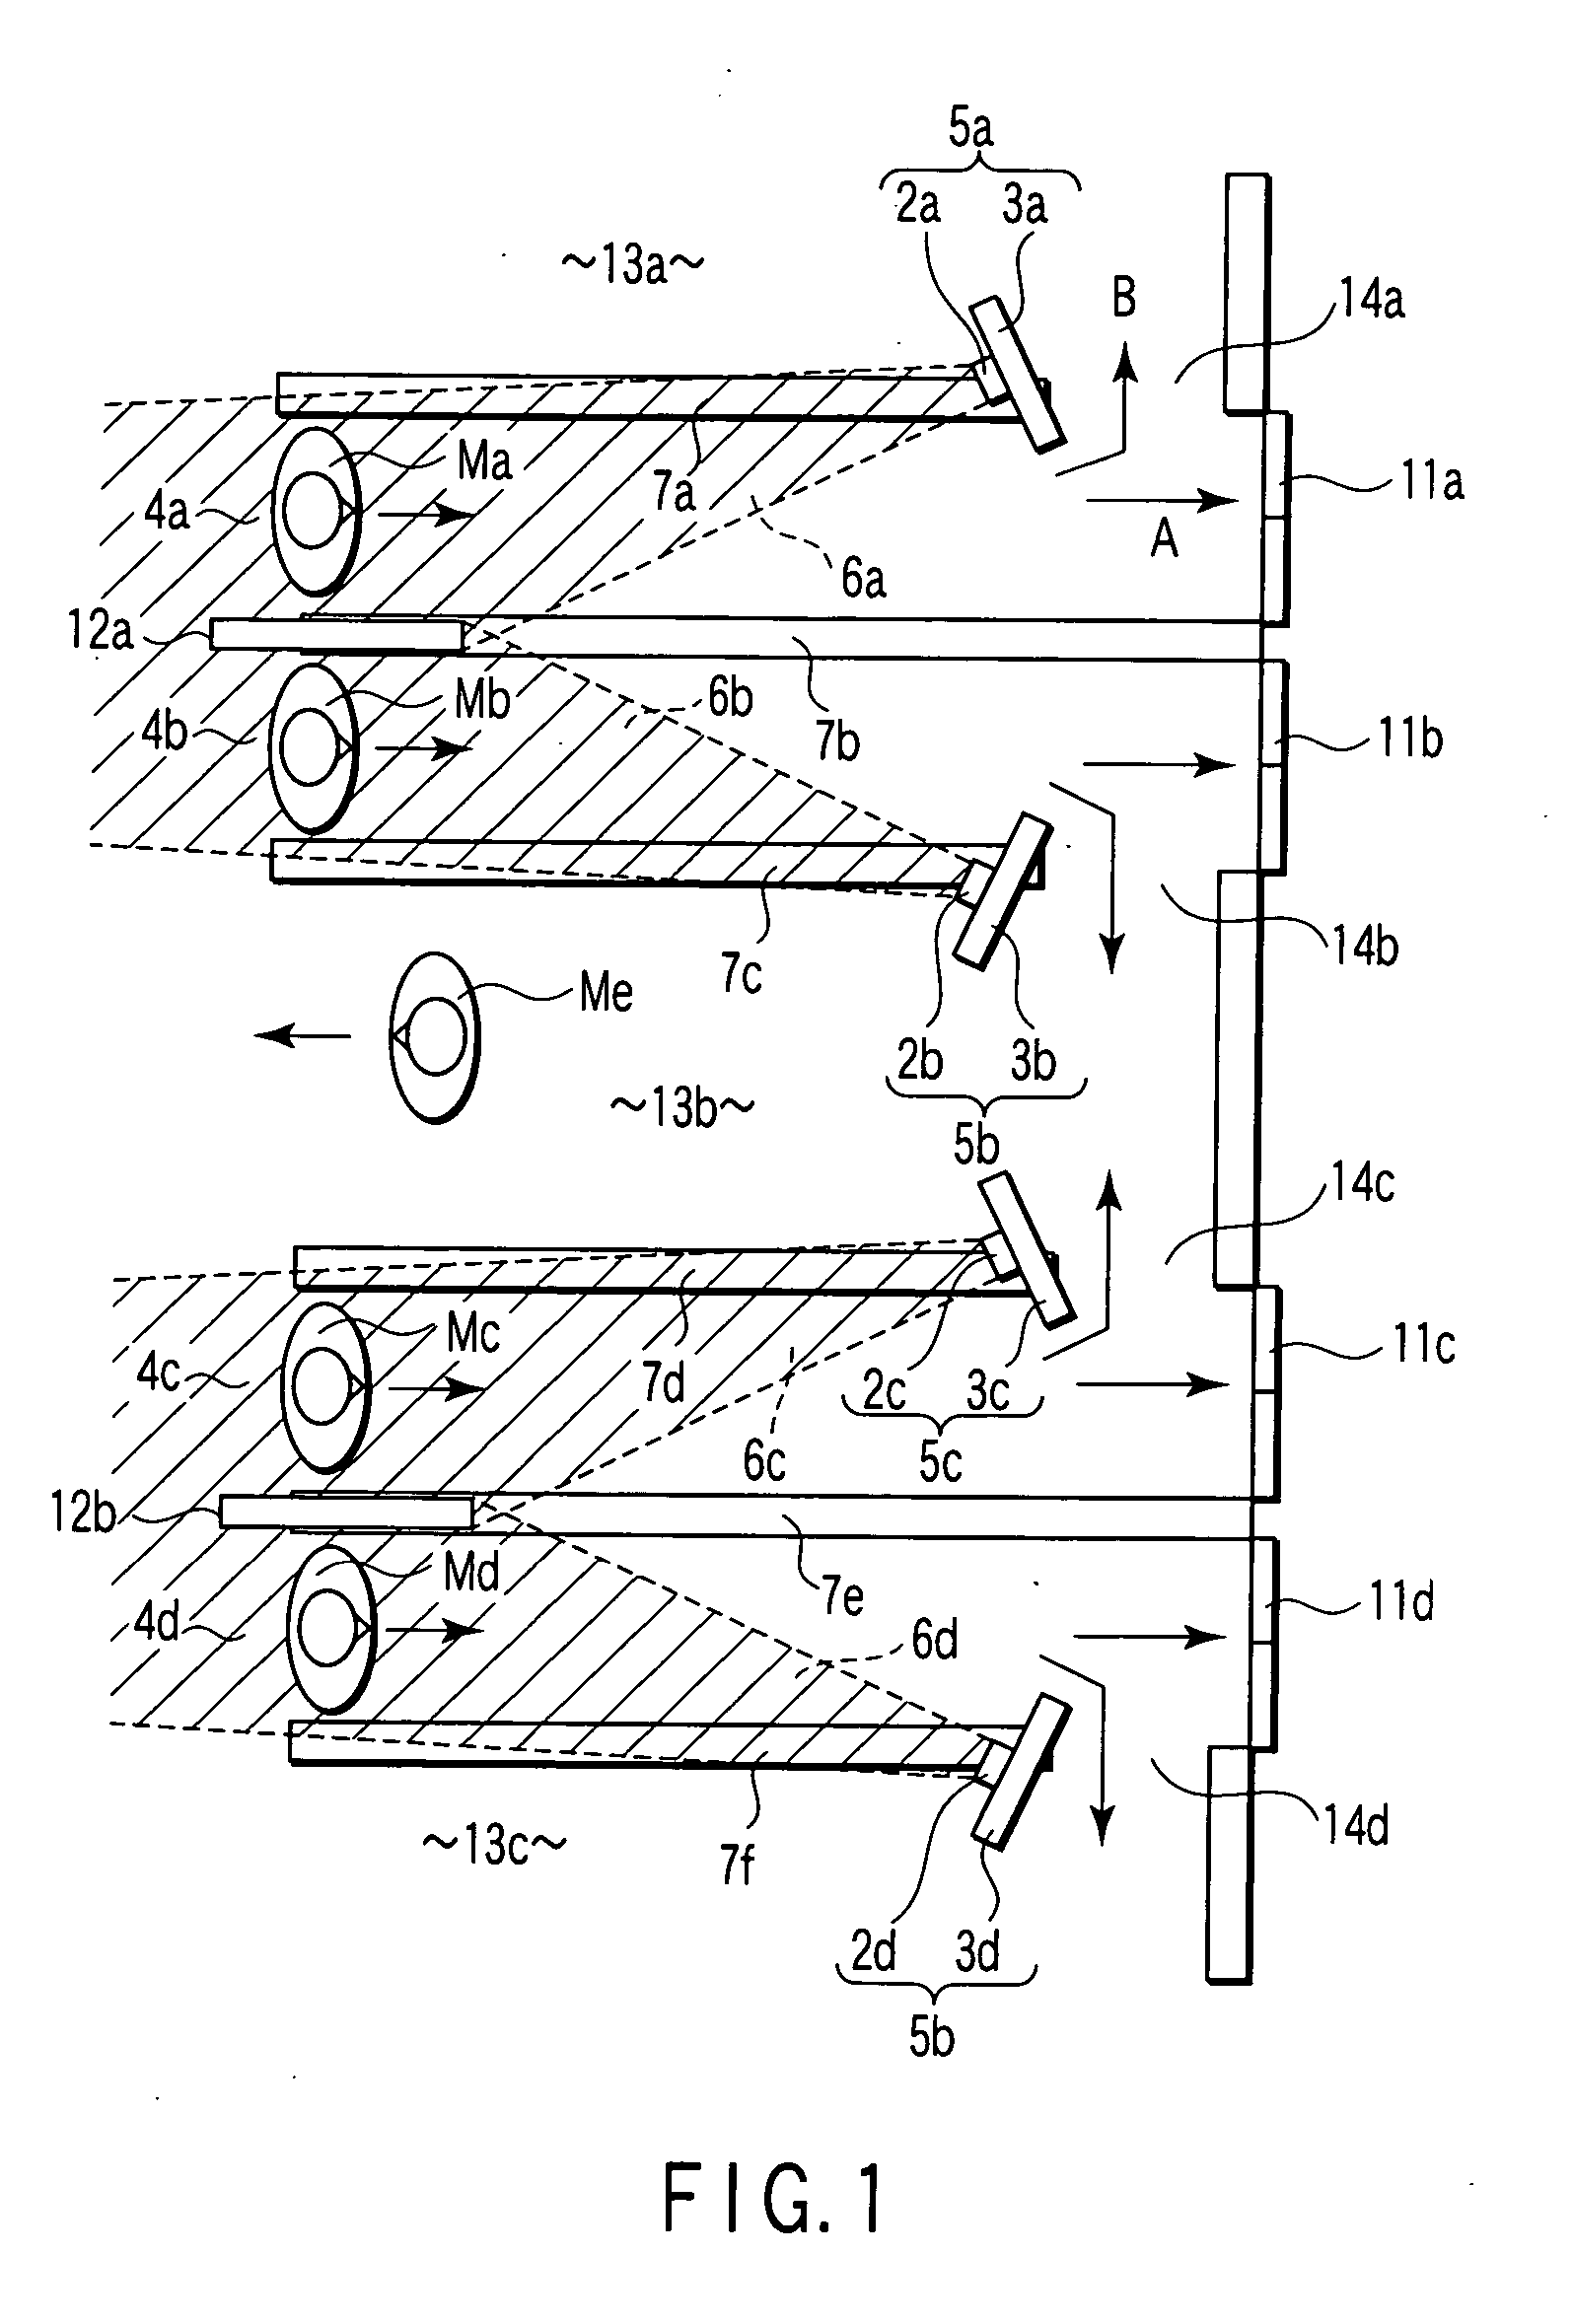 Face authentication system and gate management system